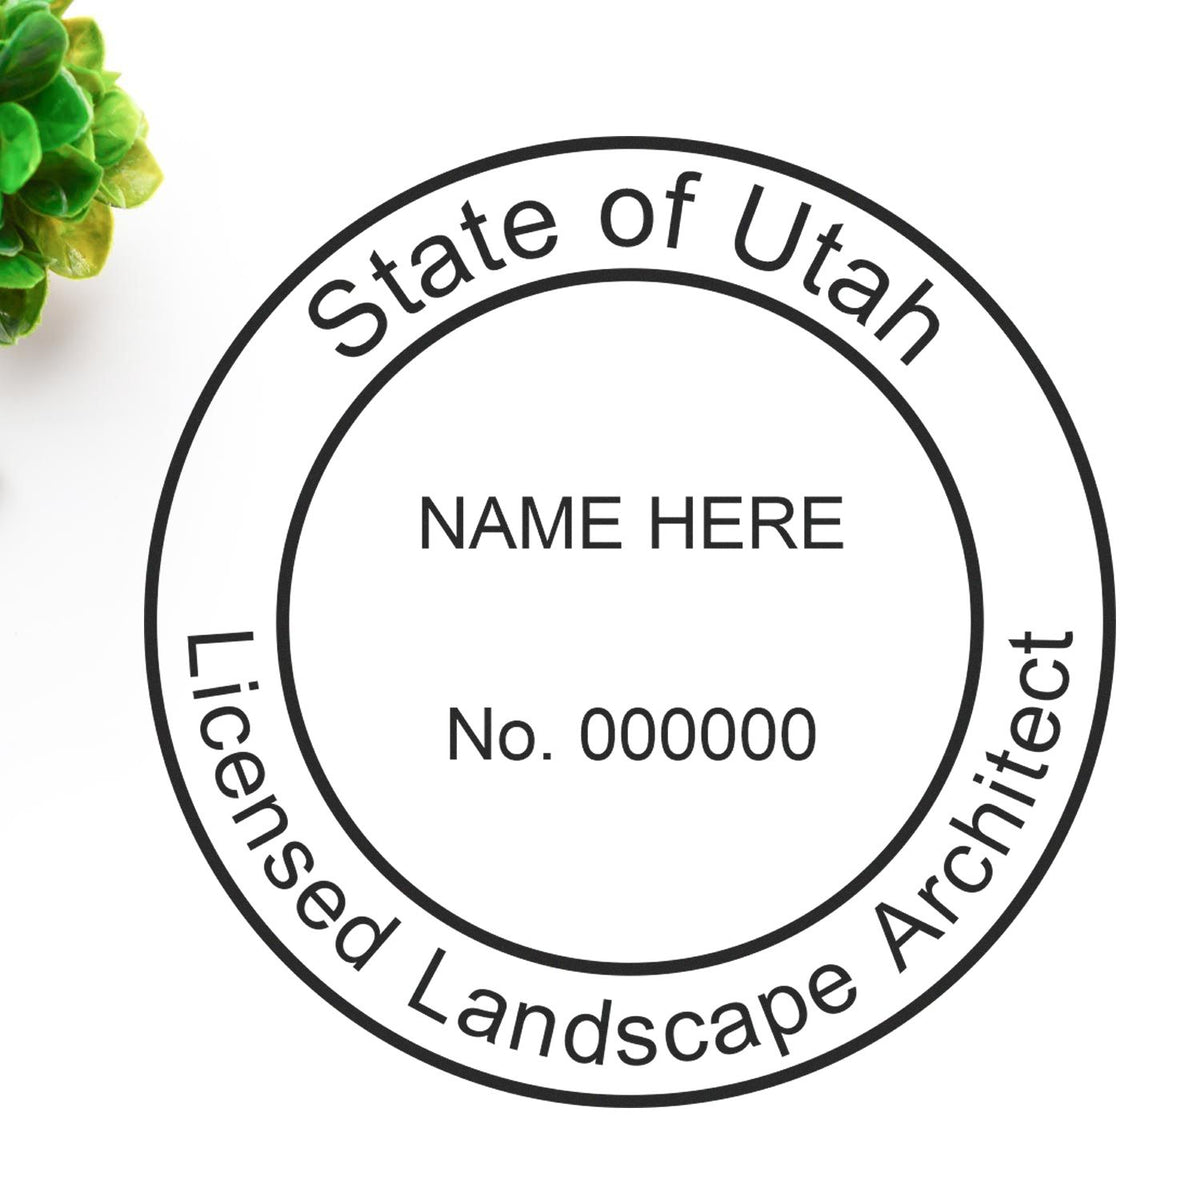 A photograph of the Self-Inking Utah Landscape Architect Stamp stamp impression reveals a vivid, professional image of the on paper.